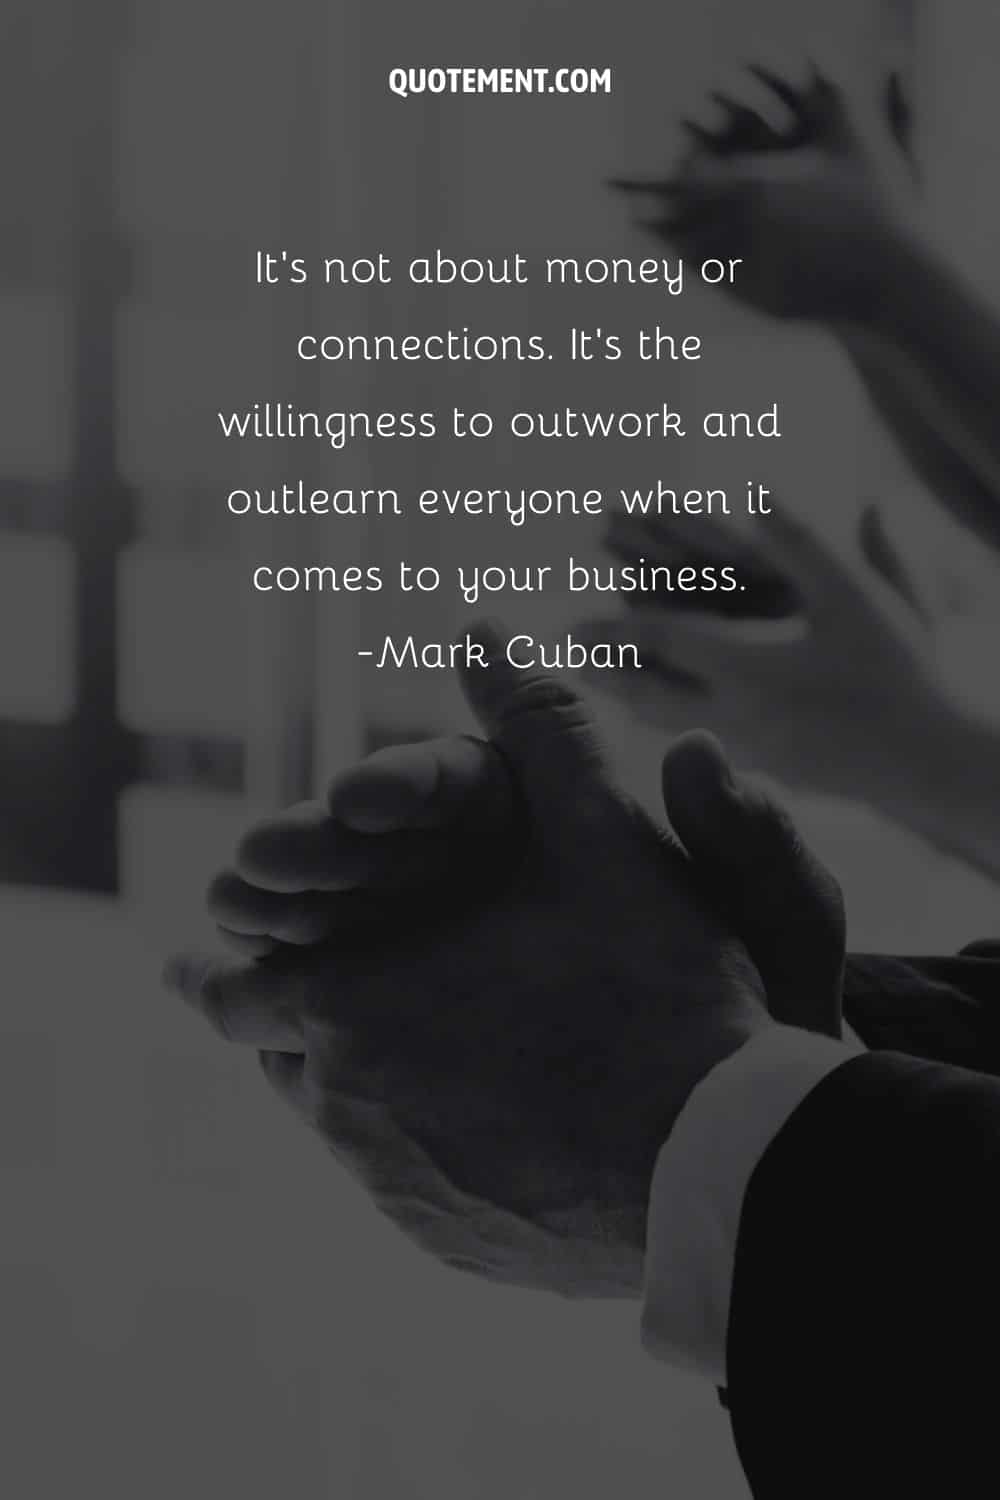 It’s not about money or connections. It’s the willingness to outwork and outlearn everyone when it comes to your business